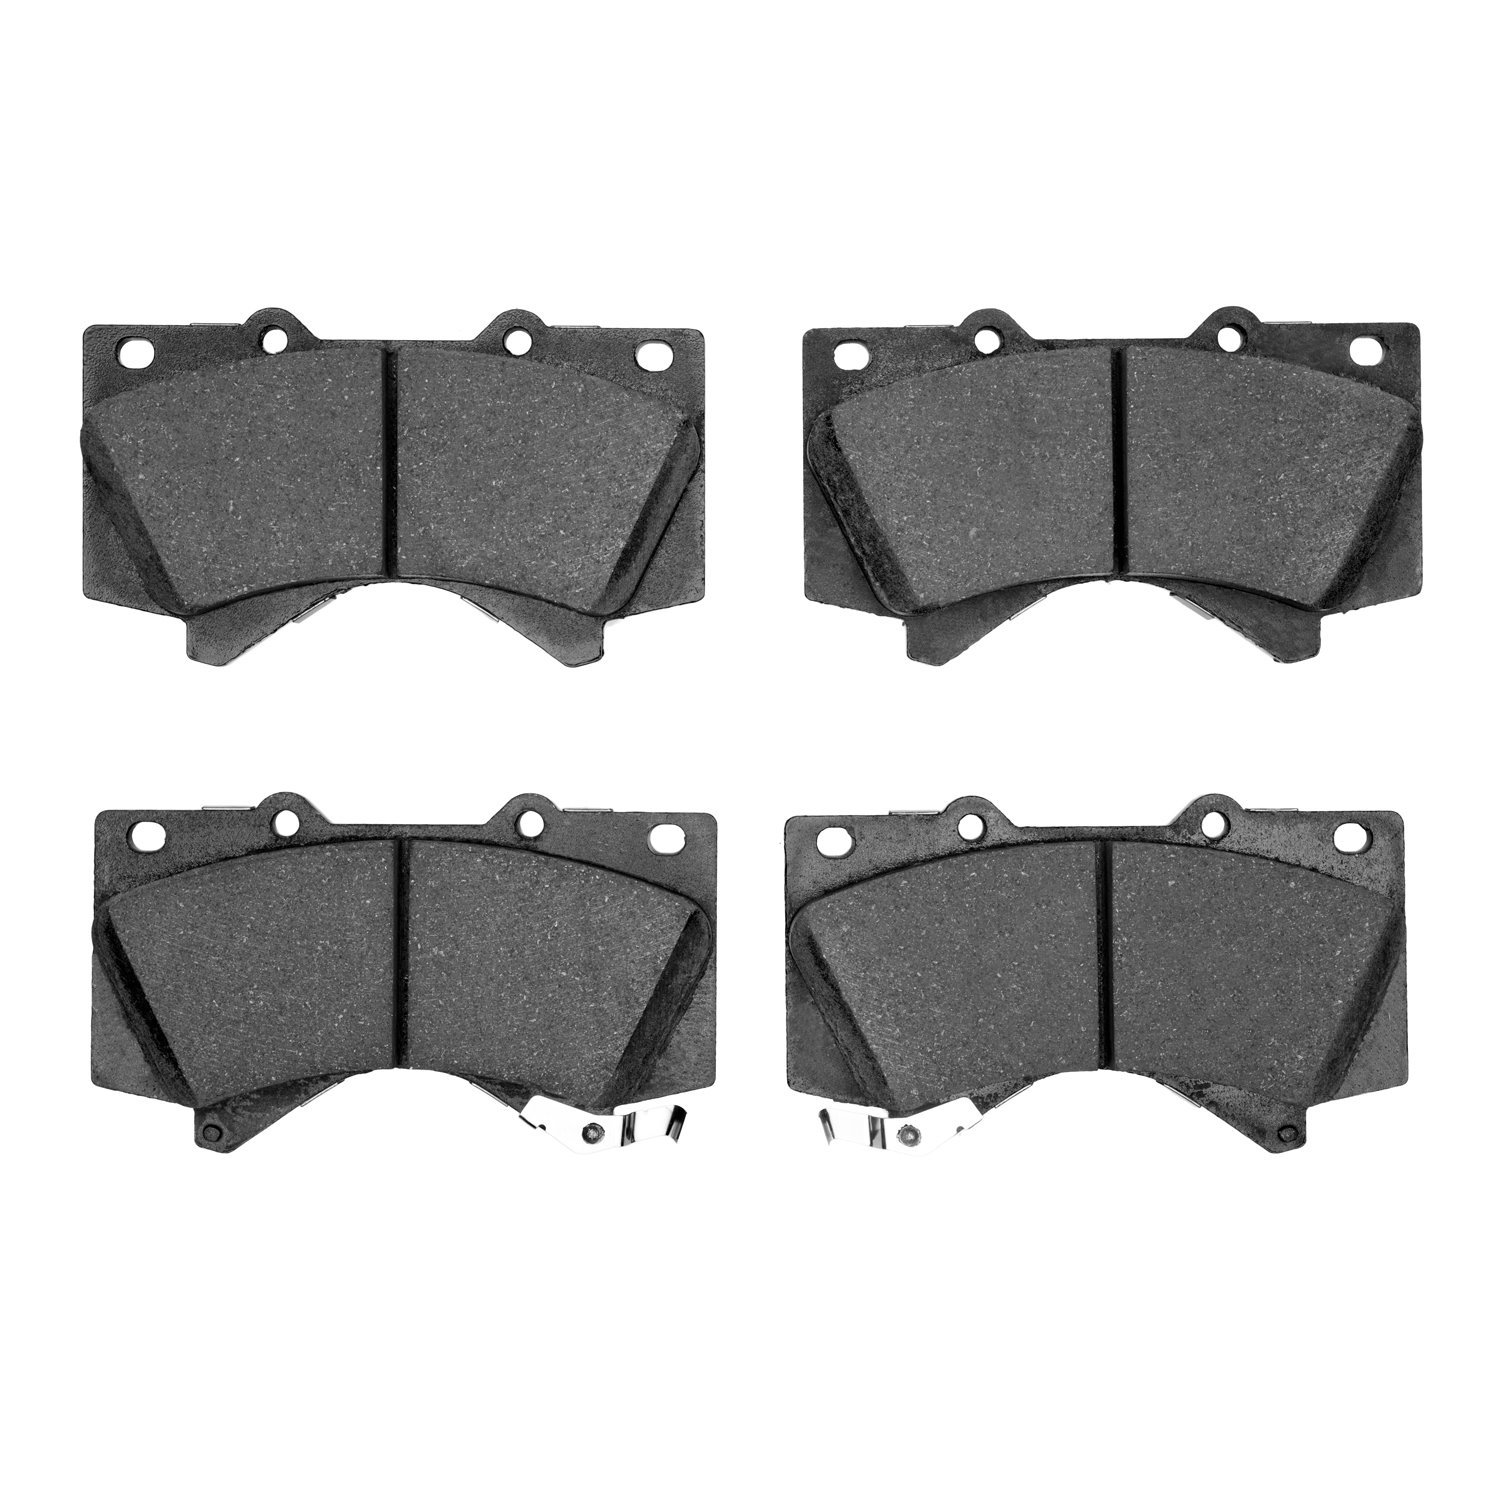 Performance Off-Road/Tow Brake Pads, Fits Select Lexus/Toyota/Scion, Position: Front